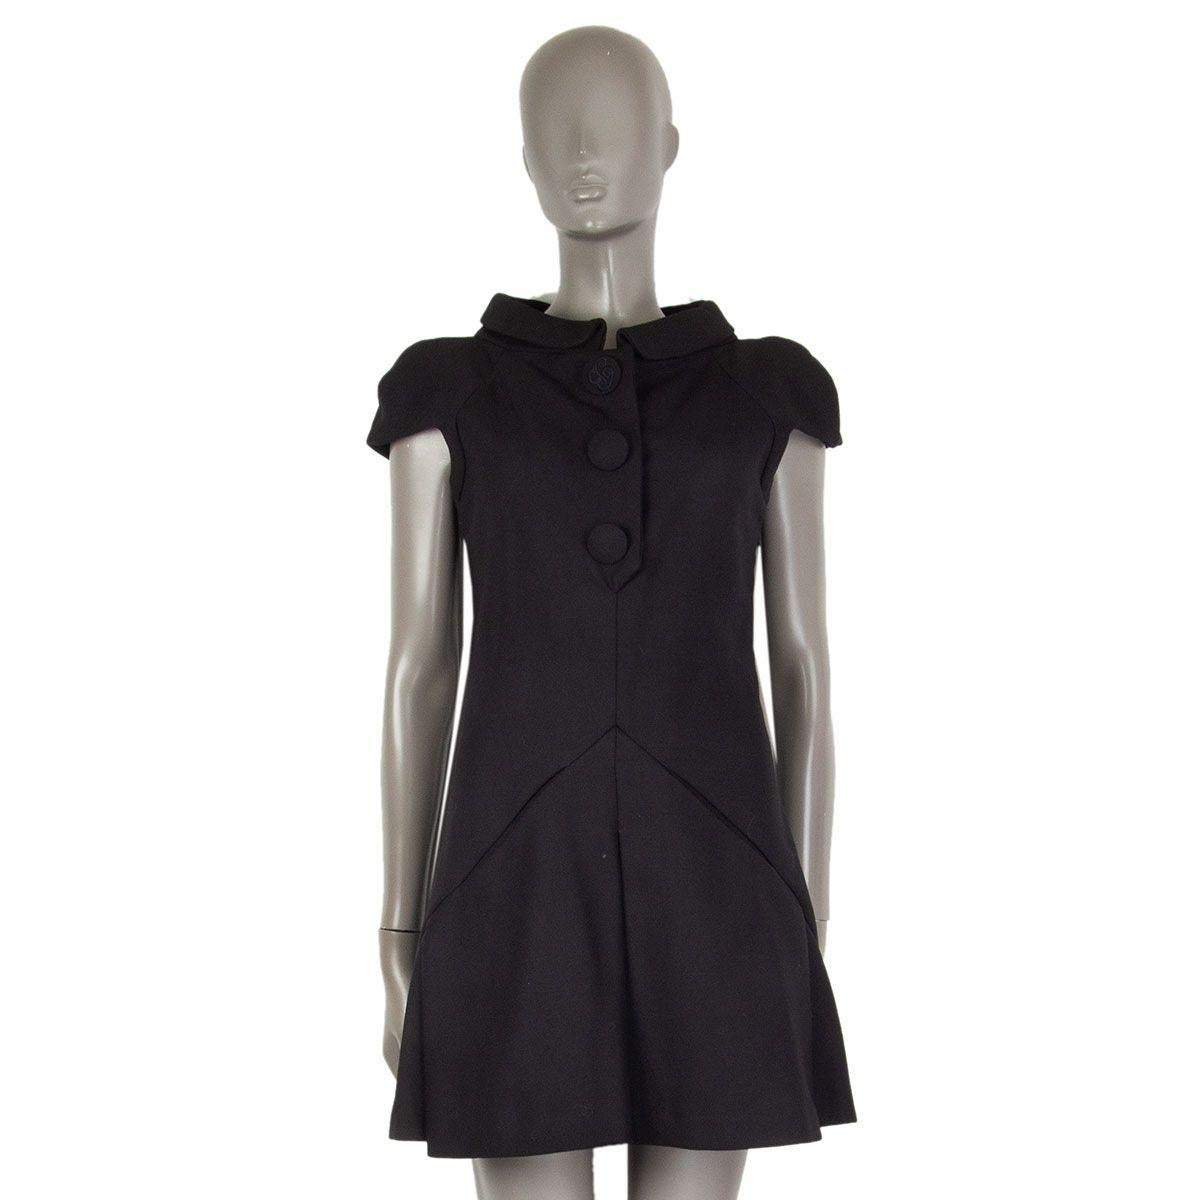 authentic Balenciaga short sleeves button-logo embellished dress in black wool (100%) with a flared and pleated skirt and with a basque cut and two slit pockets in it. Closes with a zipper on the side and concealed buttons on the front. Lined in